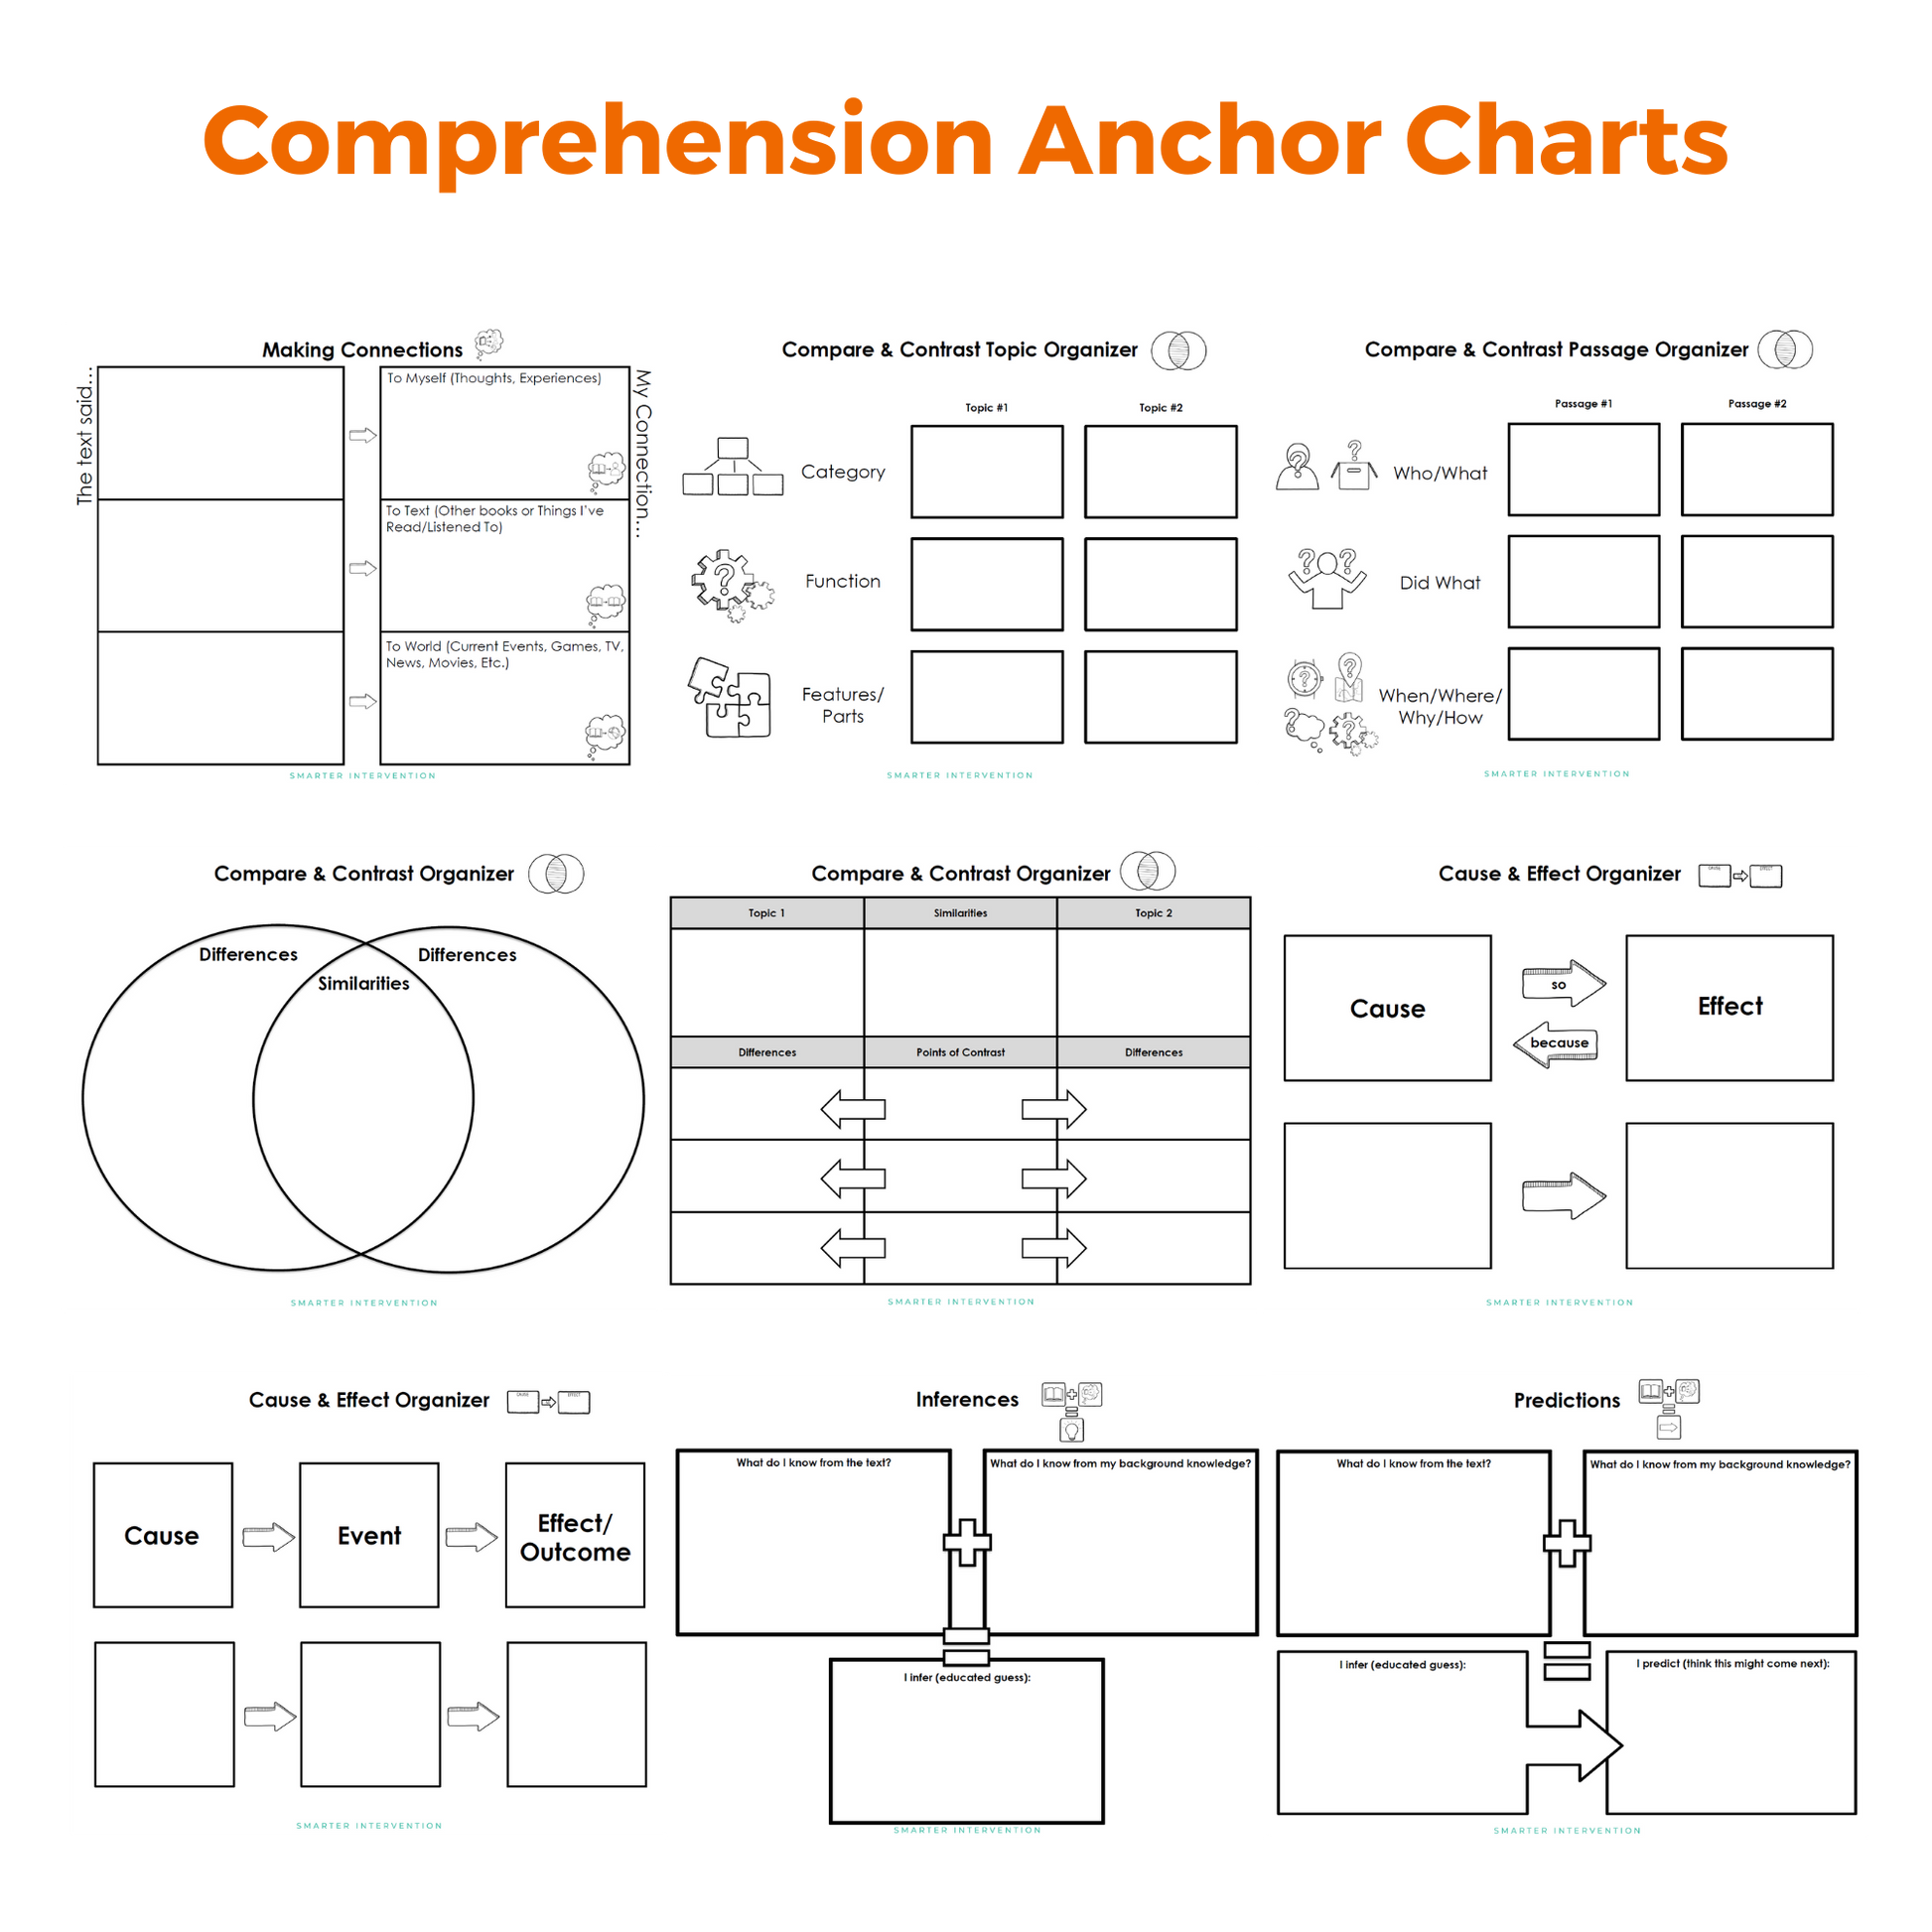 Vocabulary & Comprehension Anchor Charts – Ascend SMARTER Intervention